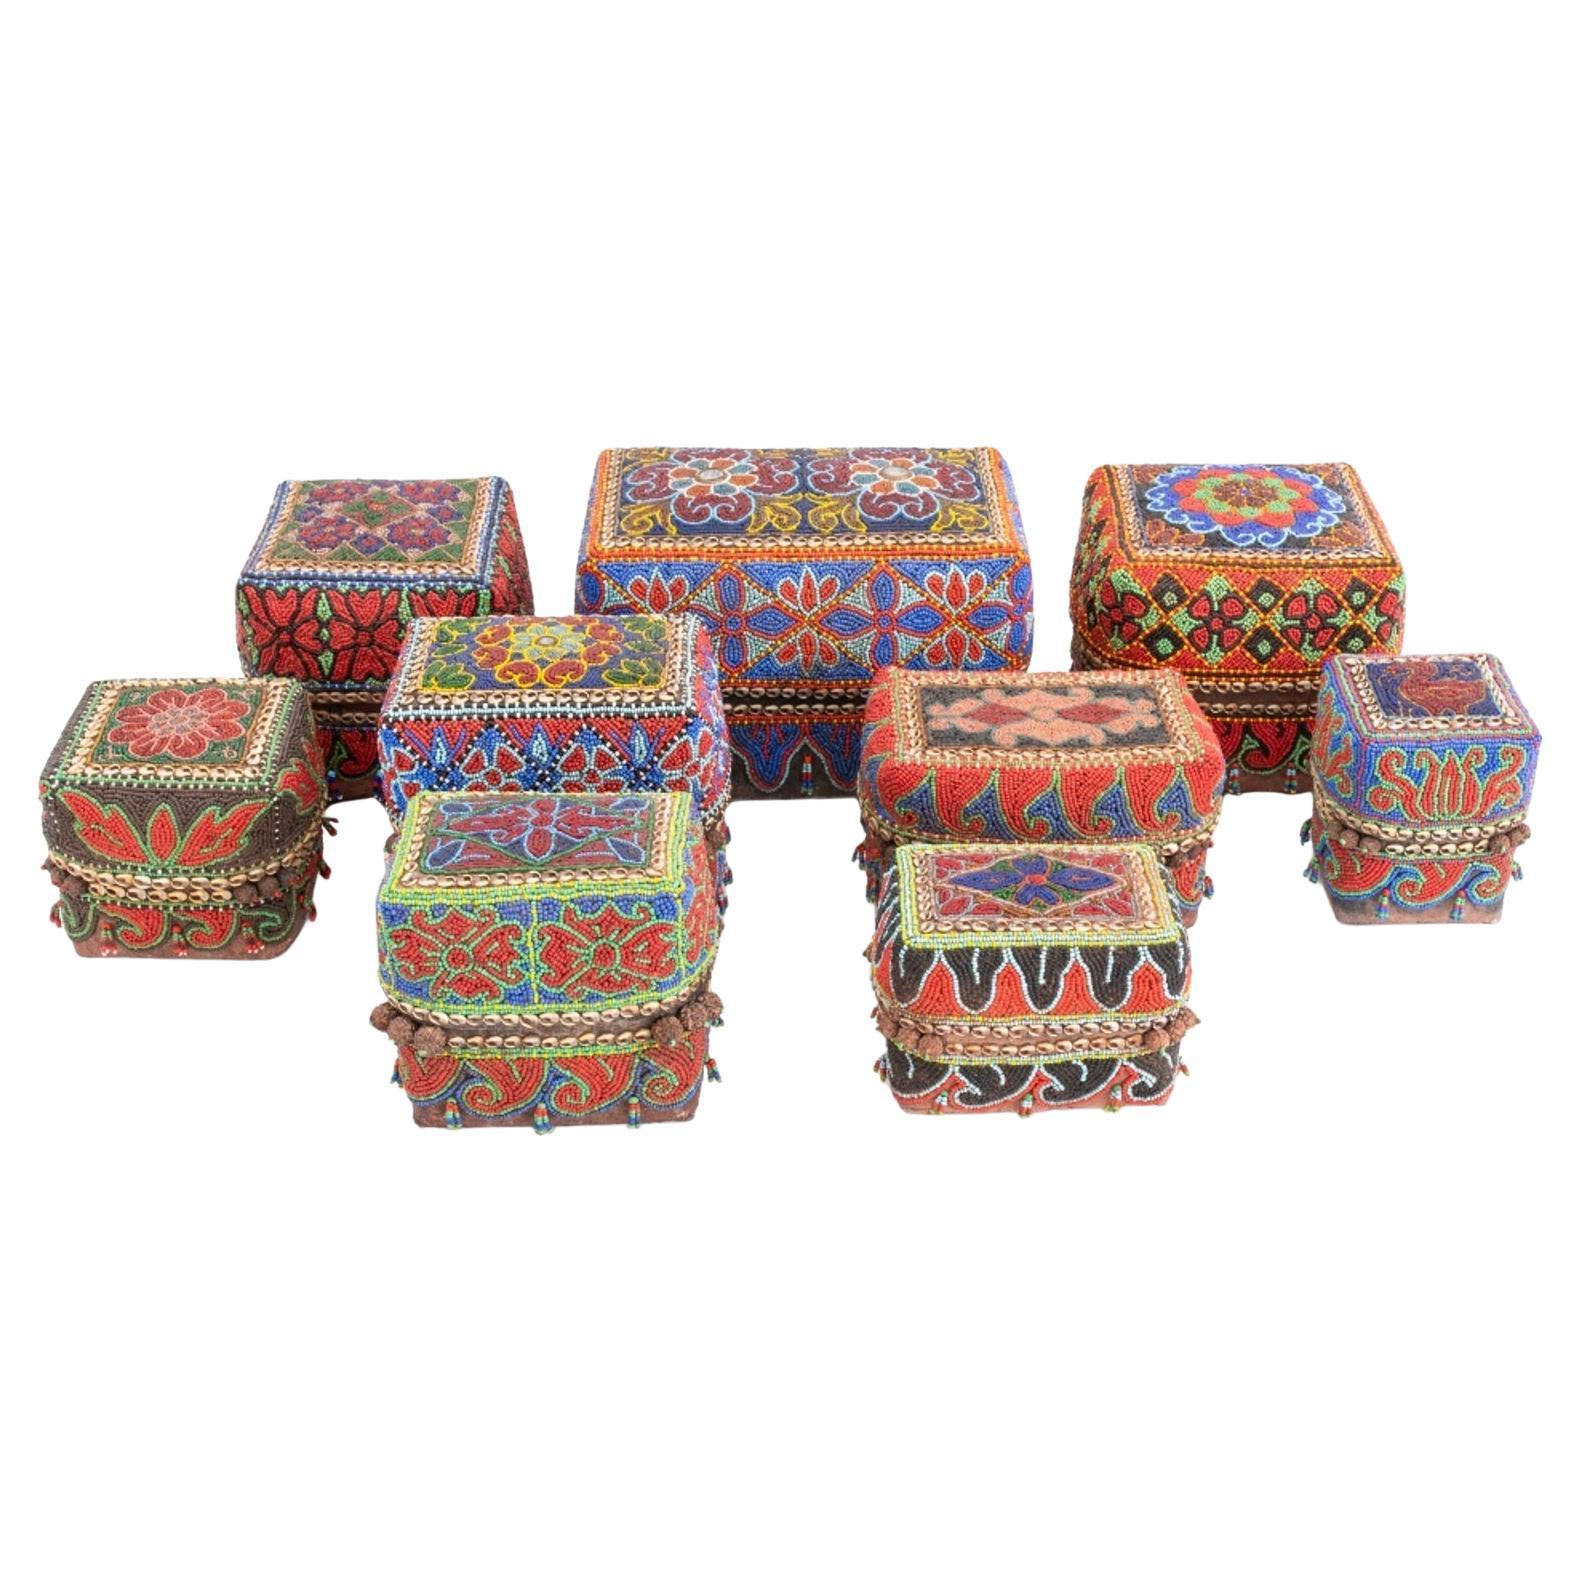 Sumatran Beaded Boxes, Group of 9 For Sale